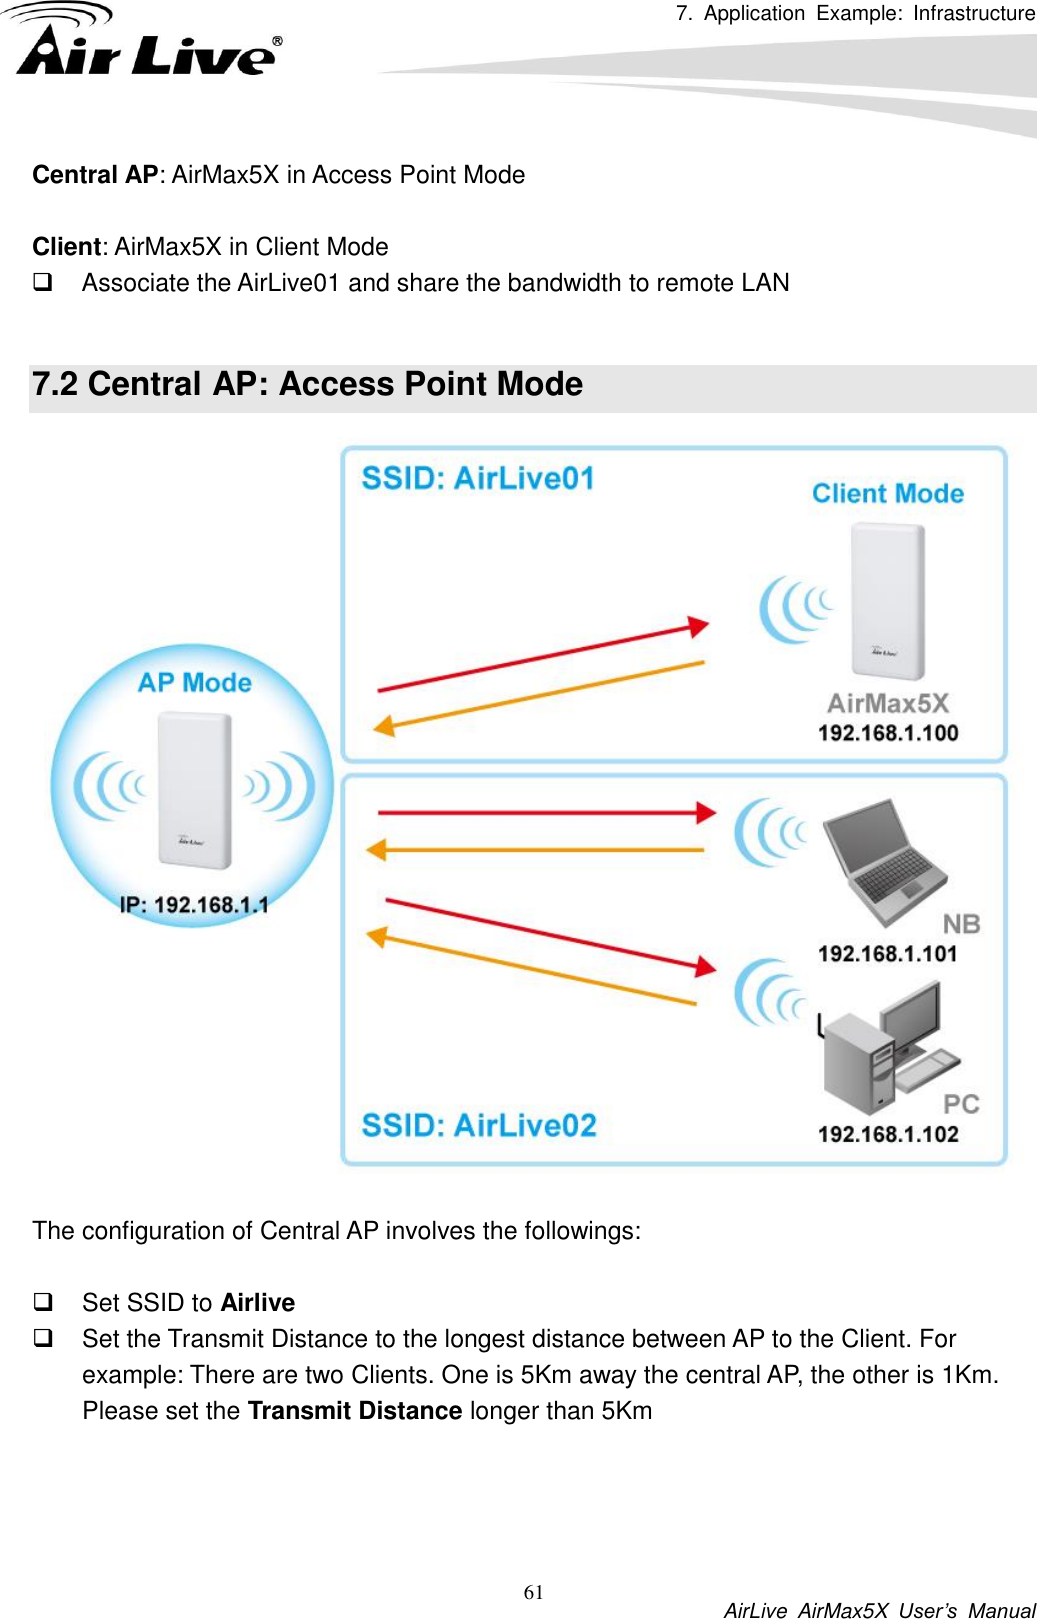 7.  Application  Example:  Infrastructure           AirLive  AirMax5X  User’s  Manual 61 Central AP: AirMax5X in Access Point Mode  Client: AirMax5X in Client Mode   Associate the AirLive01 and share the bandwidth to remote LAN  7.2 Central AP: Access Point Mode   The configuration of Central AP involves the followings:    Set SSID to Airlive   Set the Transmit Distance to the longest distance between AP to the Client. For example: There are two Clients. One is 5Km away the central AP, the other is 1Km. Please set the Transmit Distance longer than 5Km     